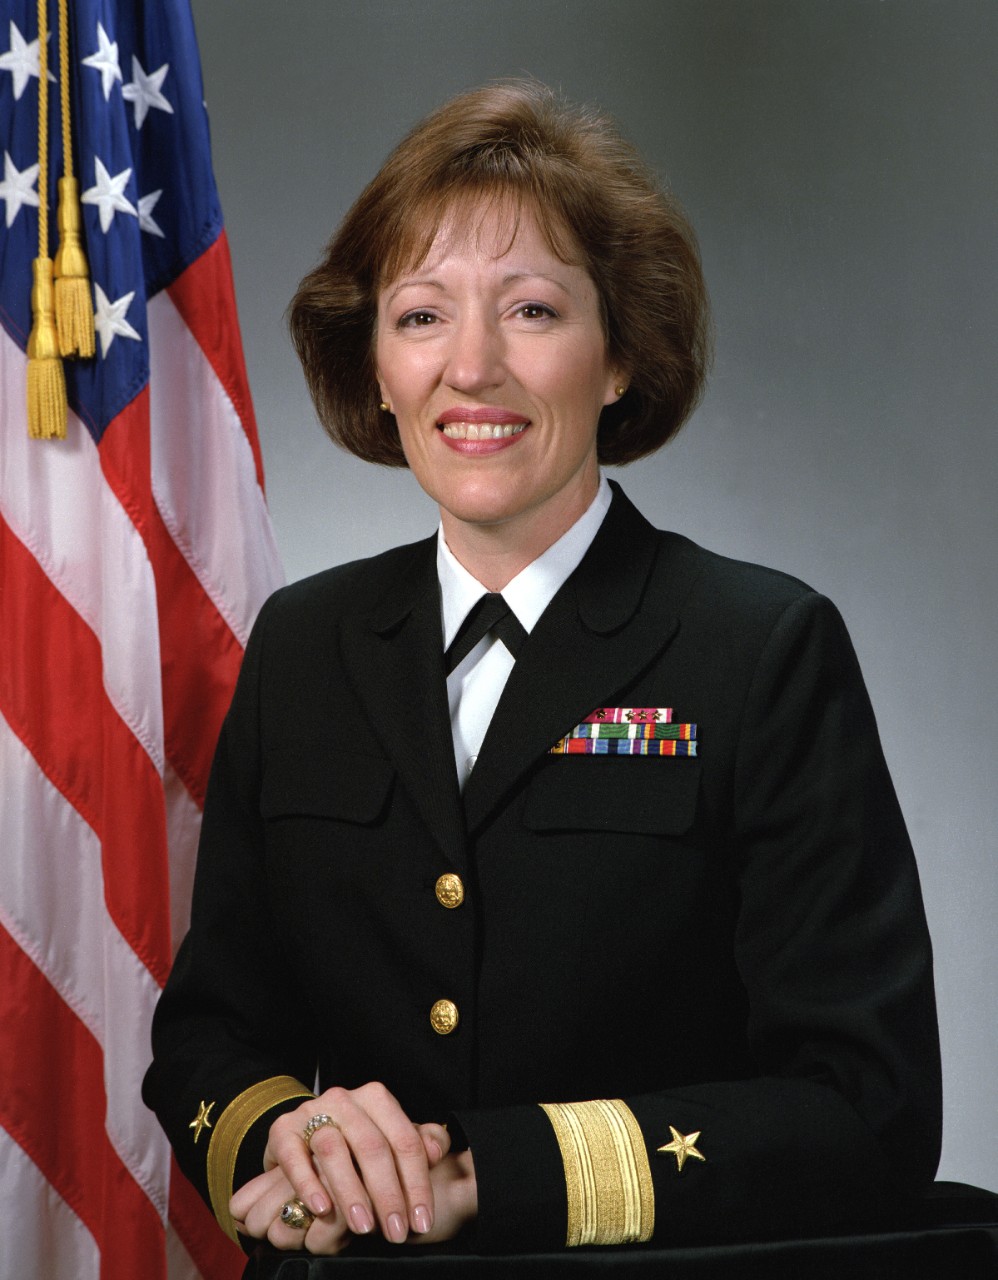 330-CFD-DN-SC-93-04081:   Rear Admiral Marsha J. Evans, 1993.  Captain Marsha J. Evans assumed command of Naval Station, Treasure Island, San Francisco, California, becoming the first woman to command a naval station.   Official U.S. Navy photograph, now in the collections of the National Archives.  